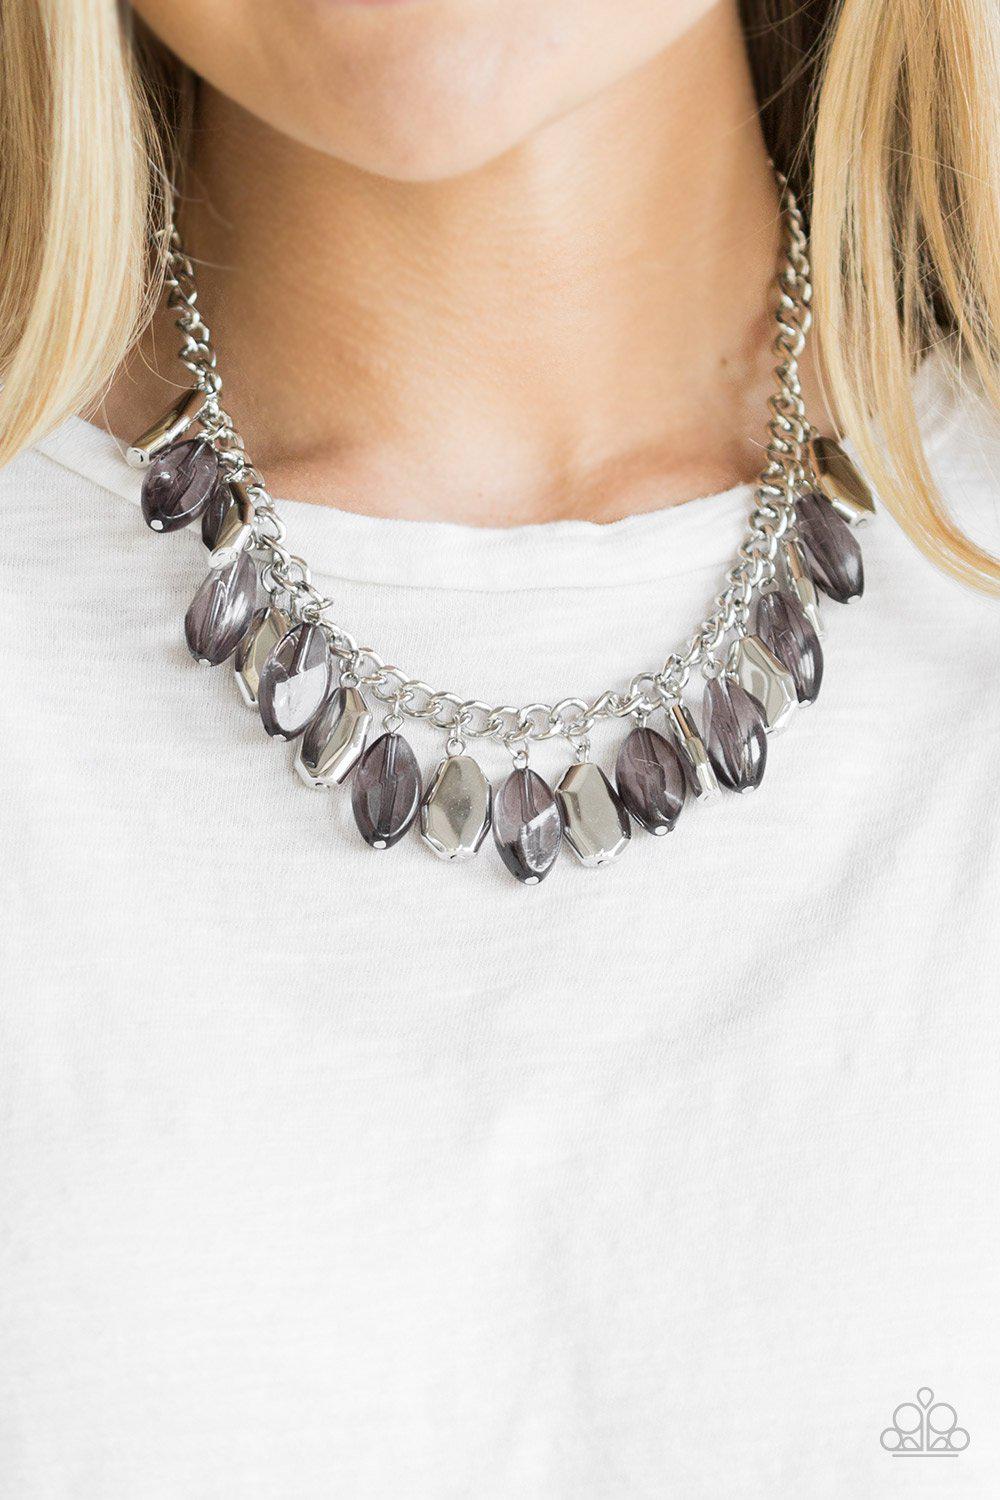 Fringe Fabulous Silver Necklace - Paparazzi Accessories-CarasShop.com - $5 Jewelry by Cara Jewels